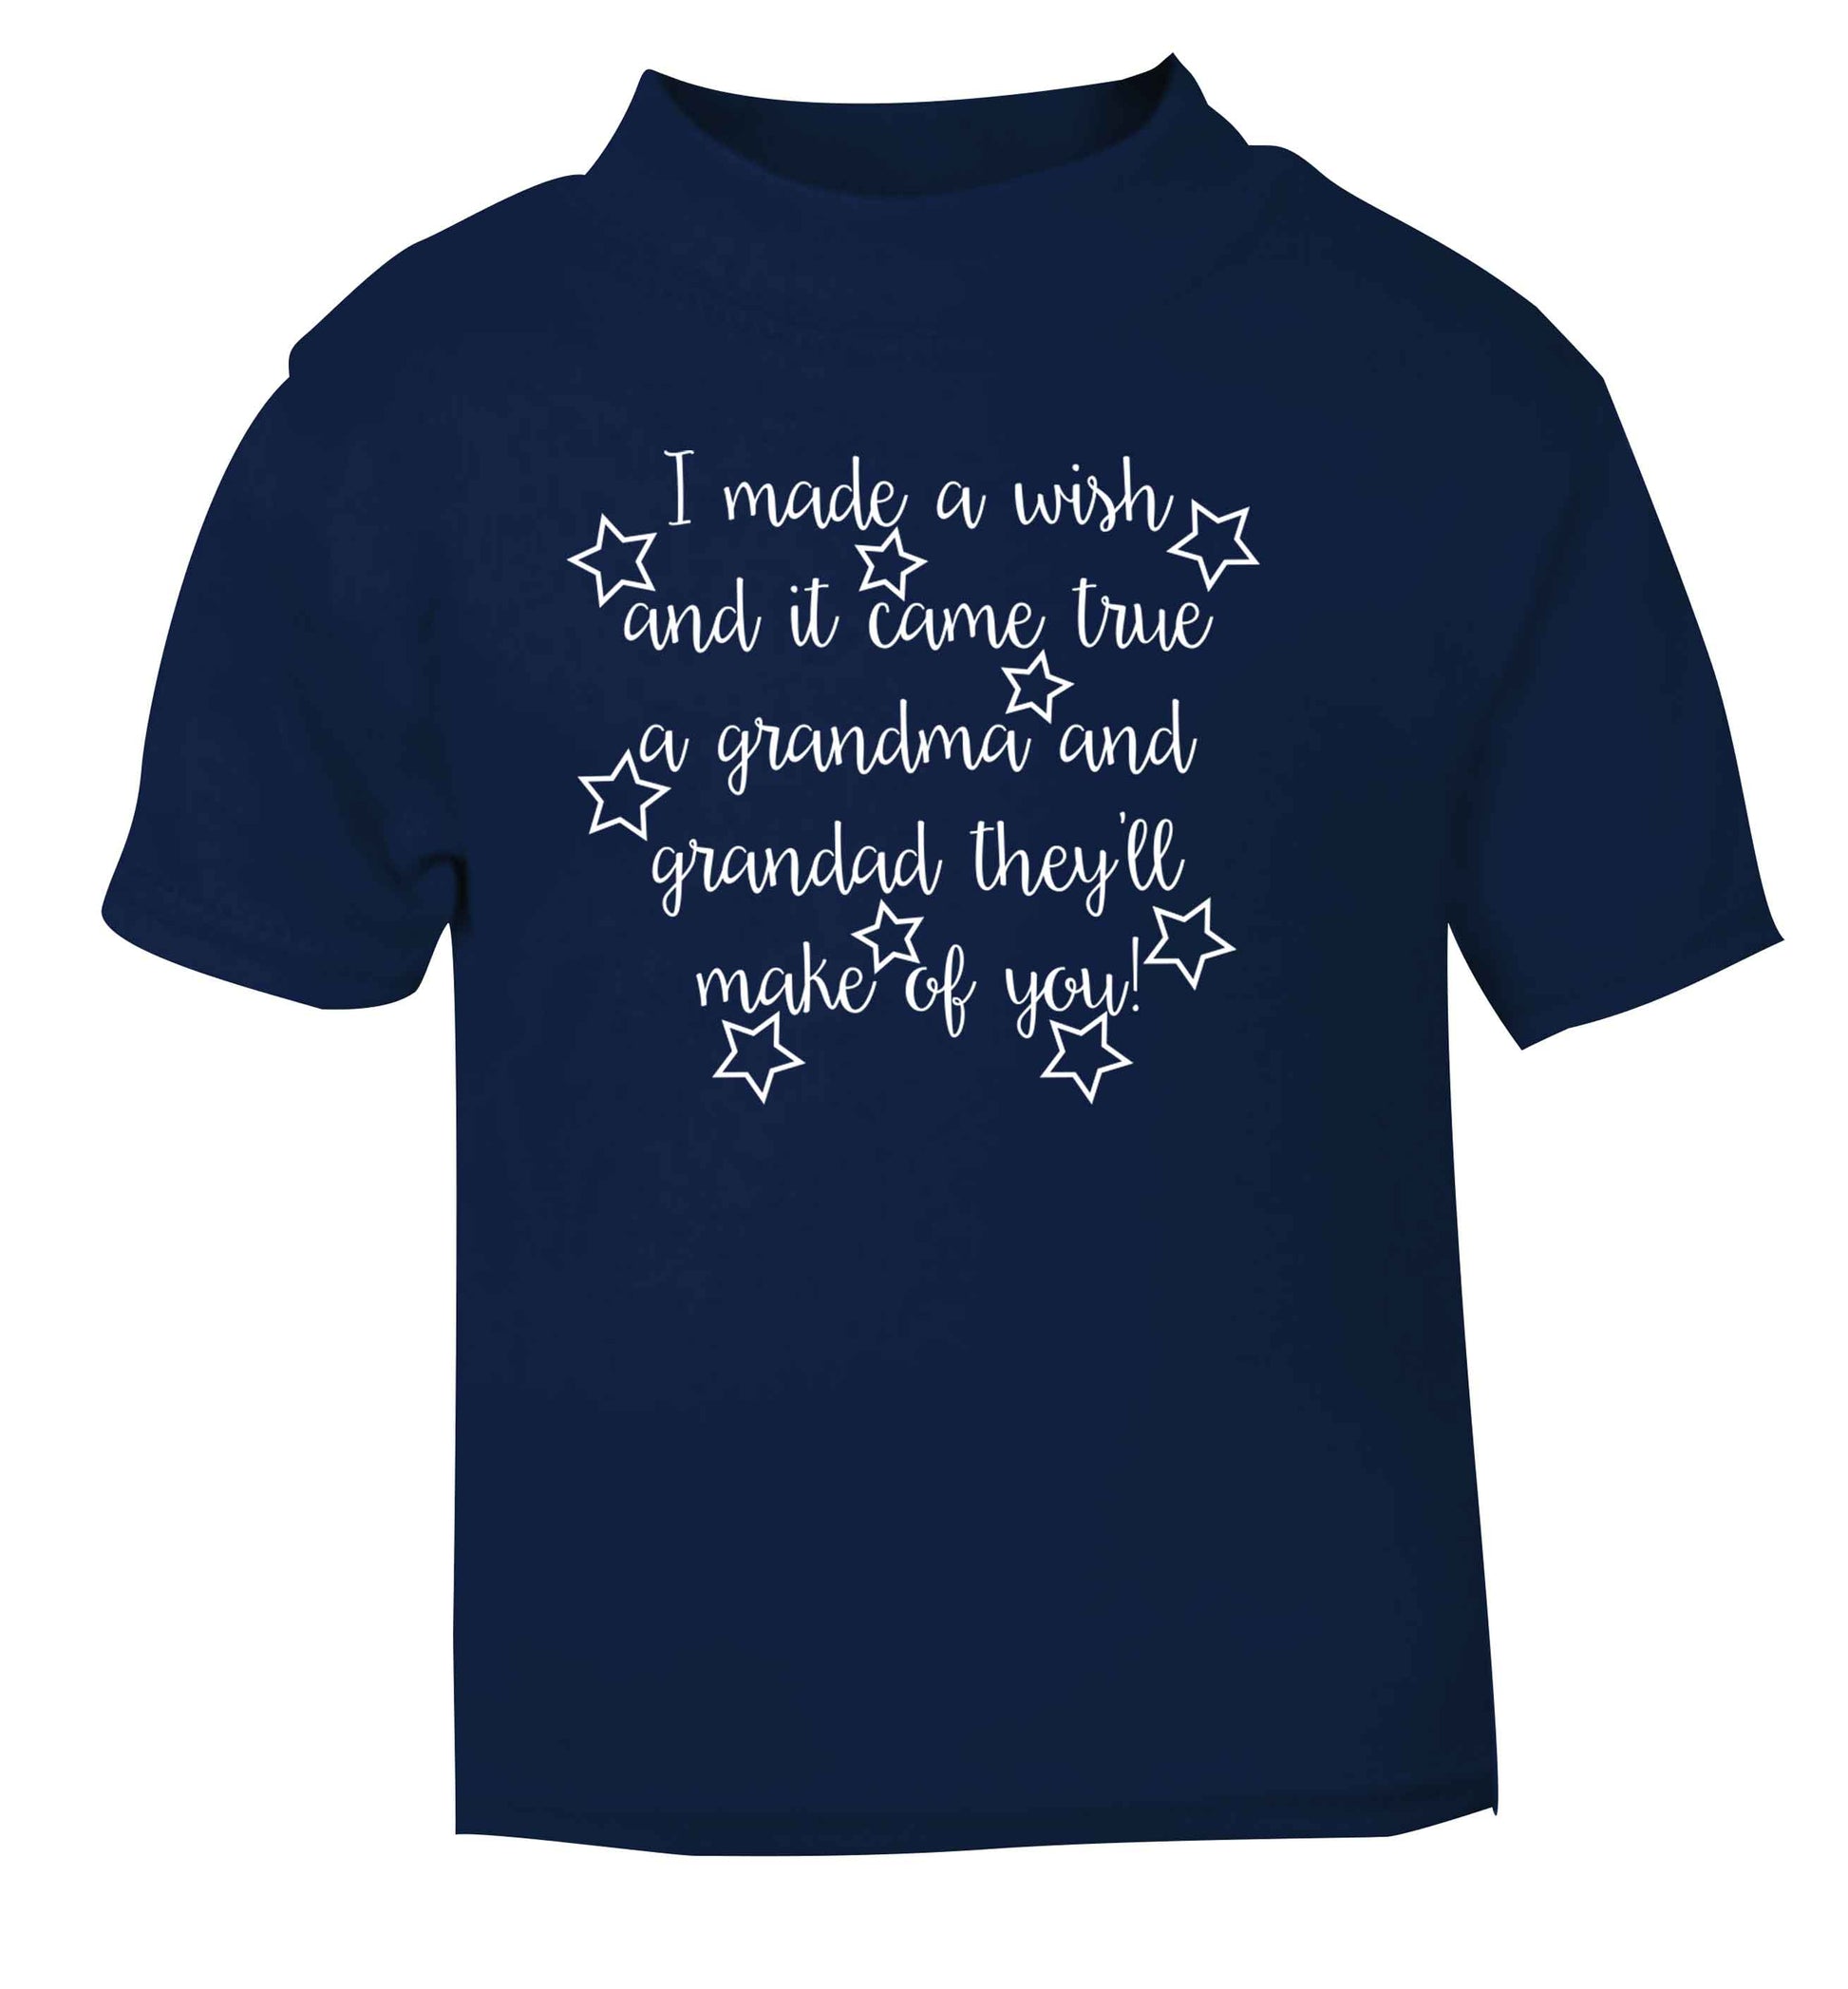 I made a wish and it came true a grandma and grandad they'll make of you! navy Baby Toddler Tshirt 2 Years